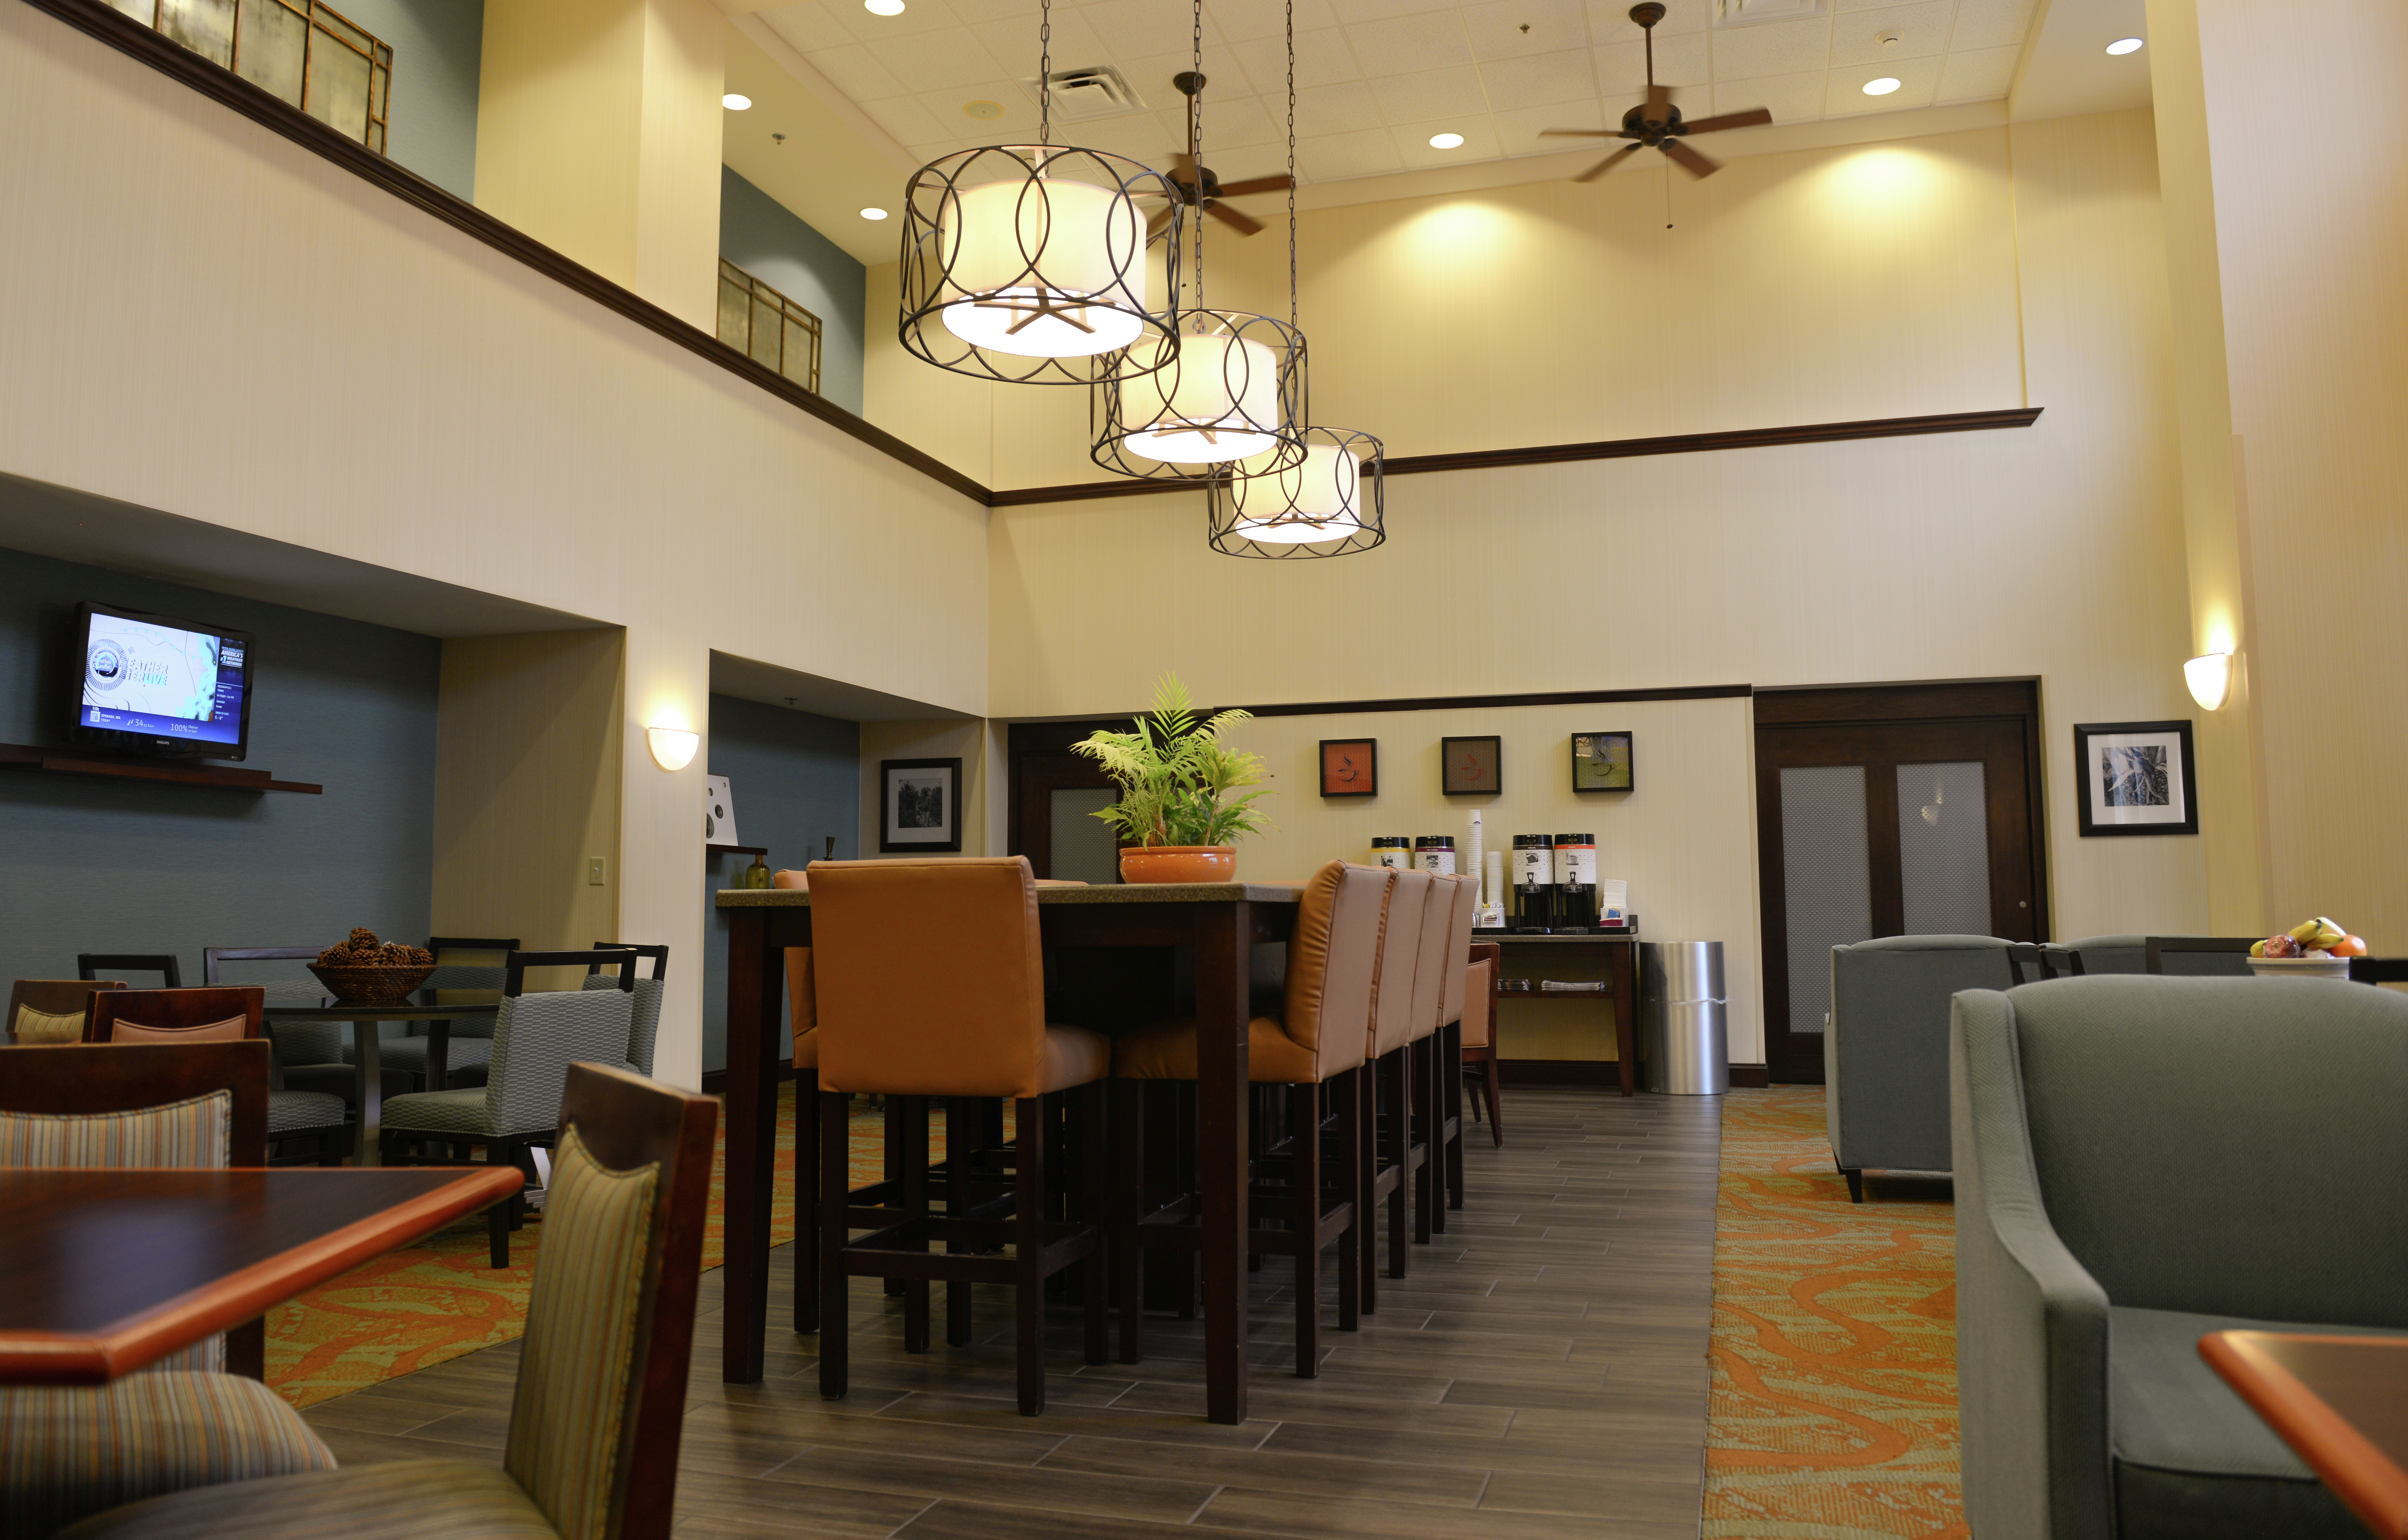 Dining Tables, Chairs, Hot Beverage Station, and TV in Lobby Seating Area